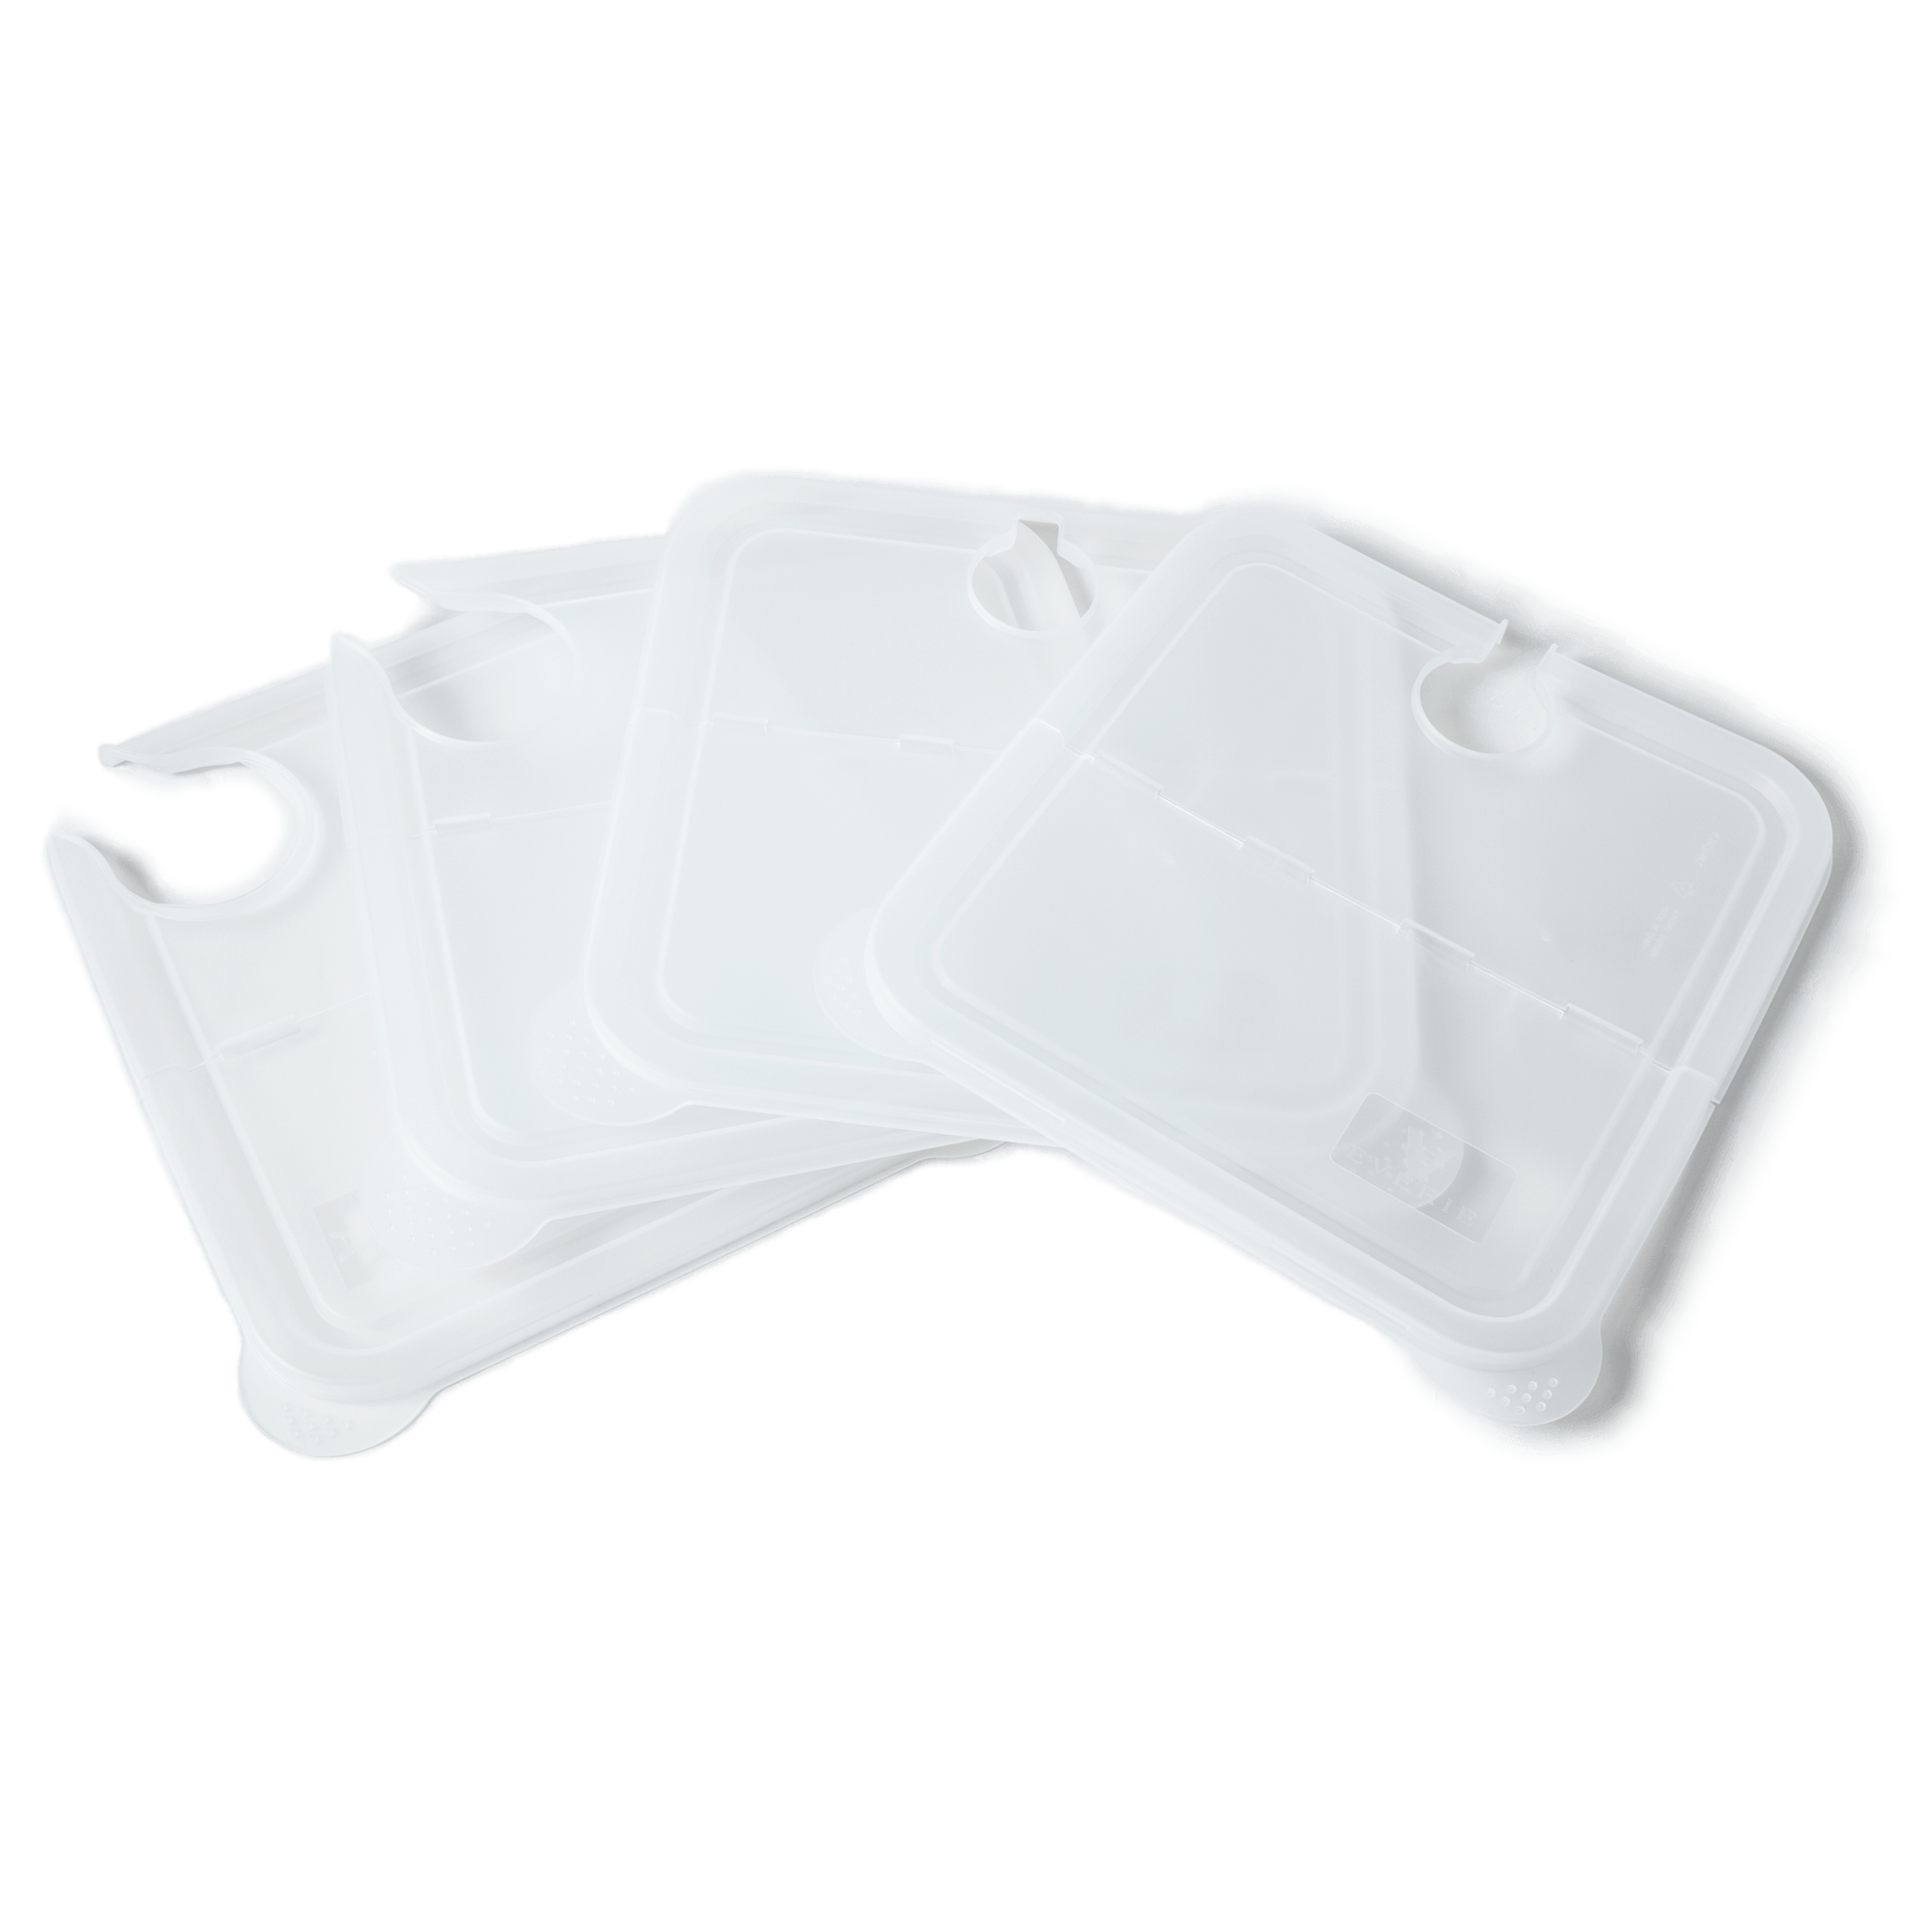 cellar Made Sous Vide Lid for Chefsteps Joule Fits 12 18 22 Quart Rubbermaid Containers